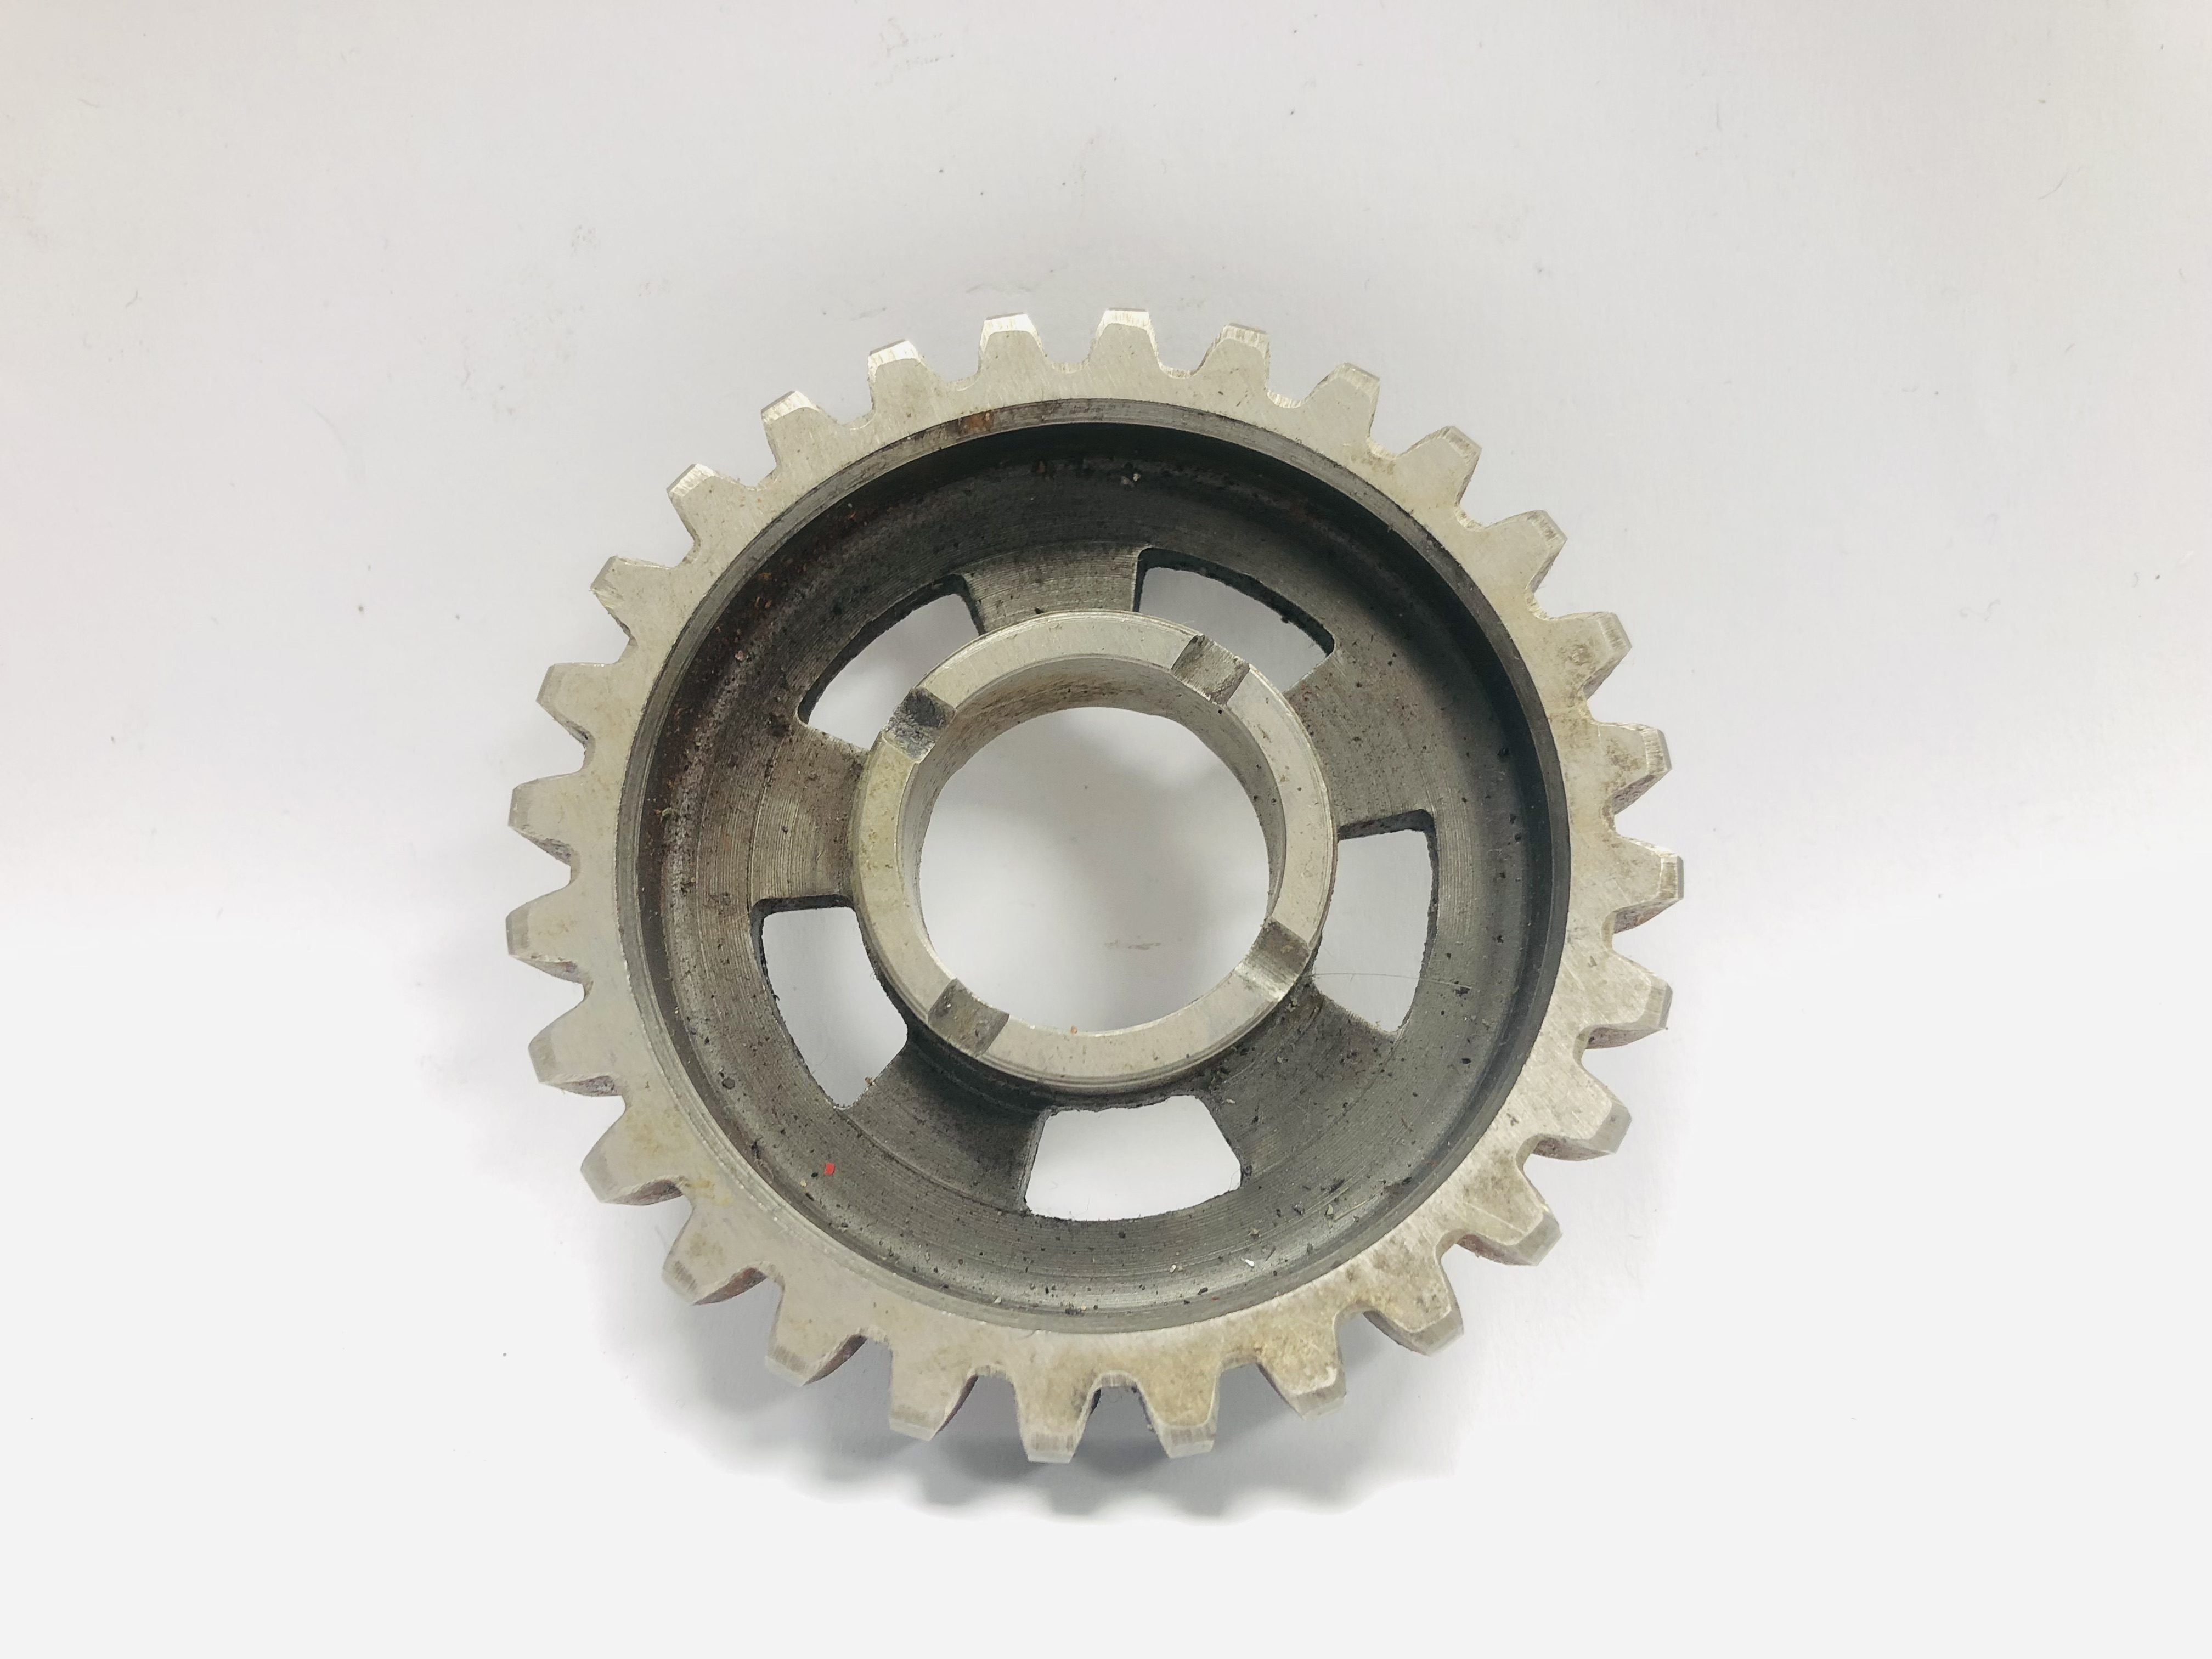 2nd Gear Layshaft.  New condition.